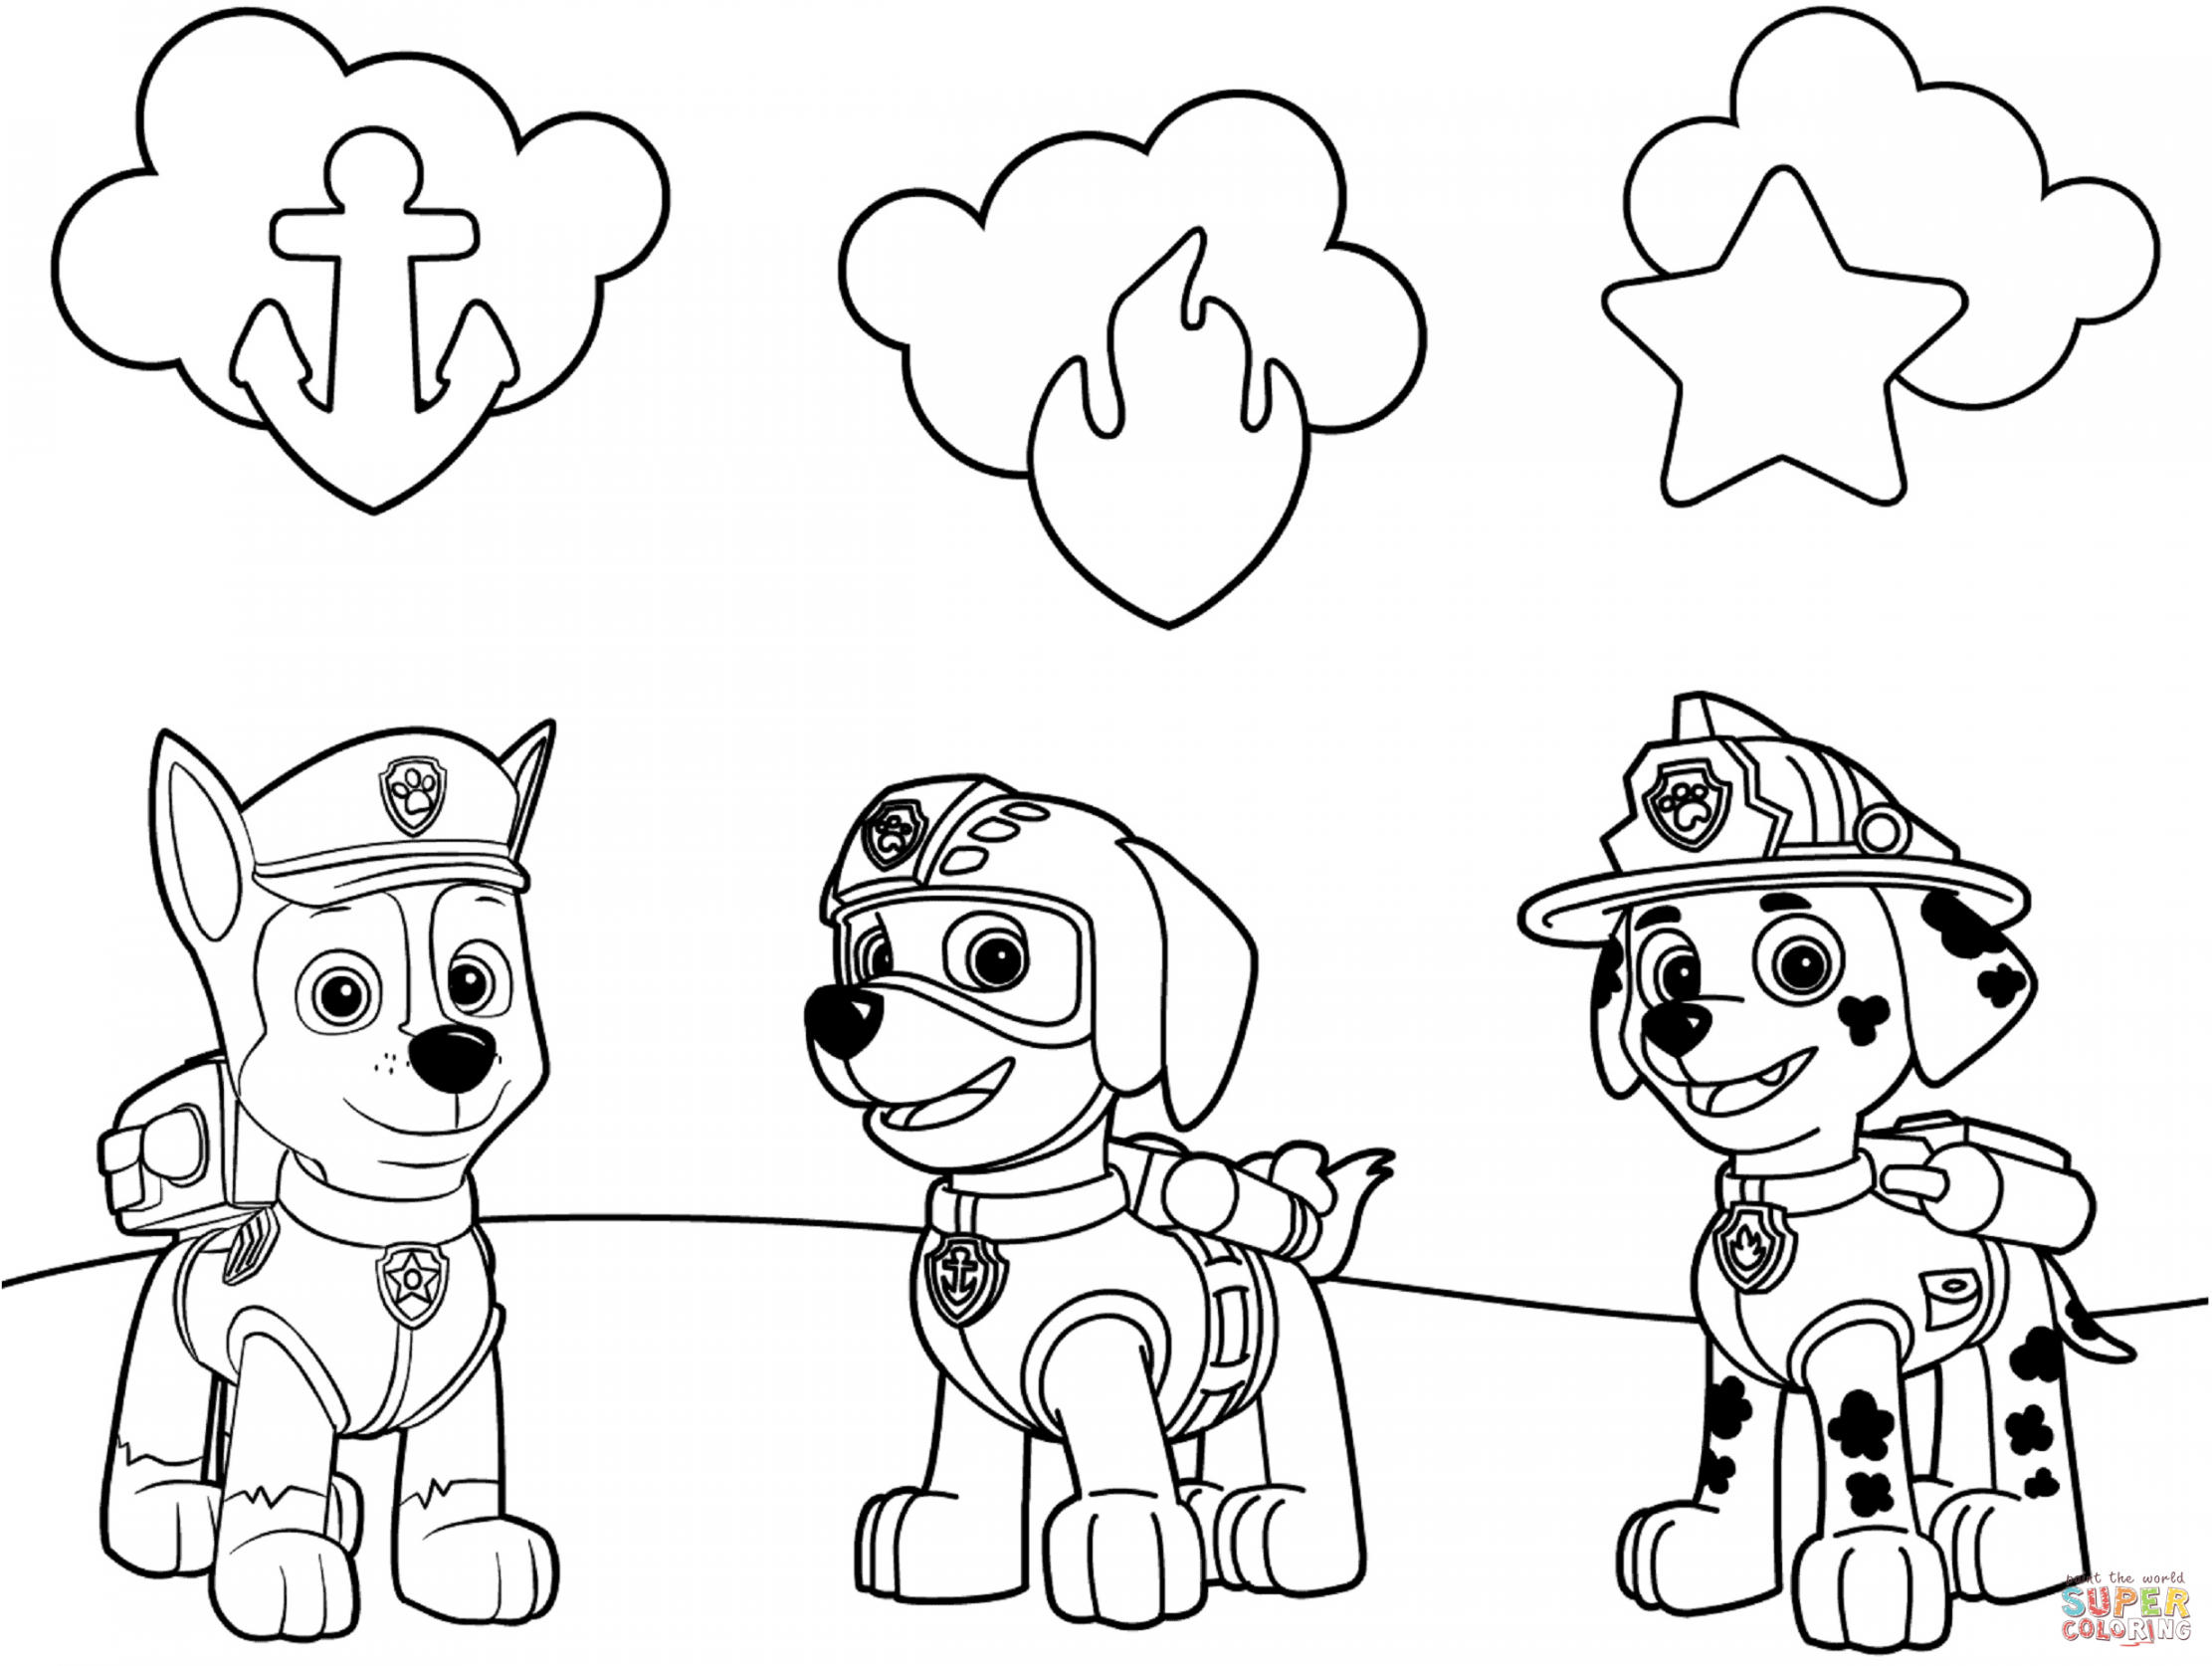 Free Printable Coloring Pages Paw Patrol - Printable - Paw Patrol Badges coloring page  Free Printable Coloring Pages